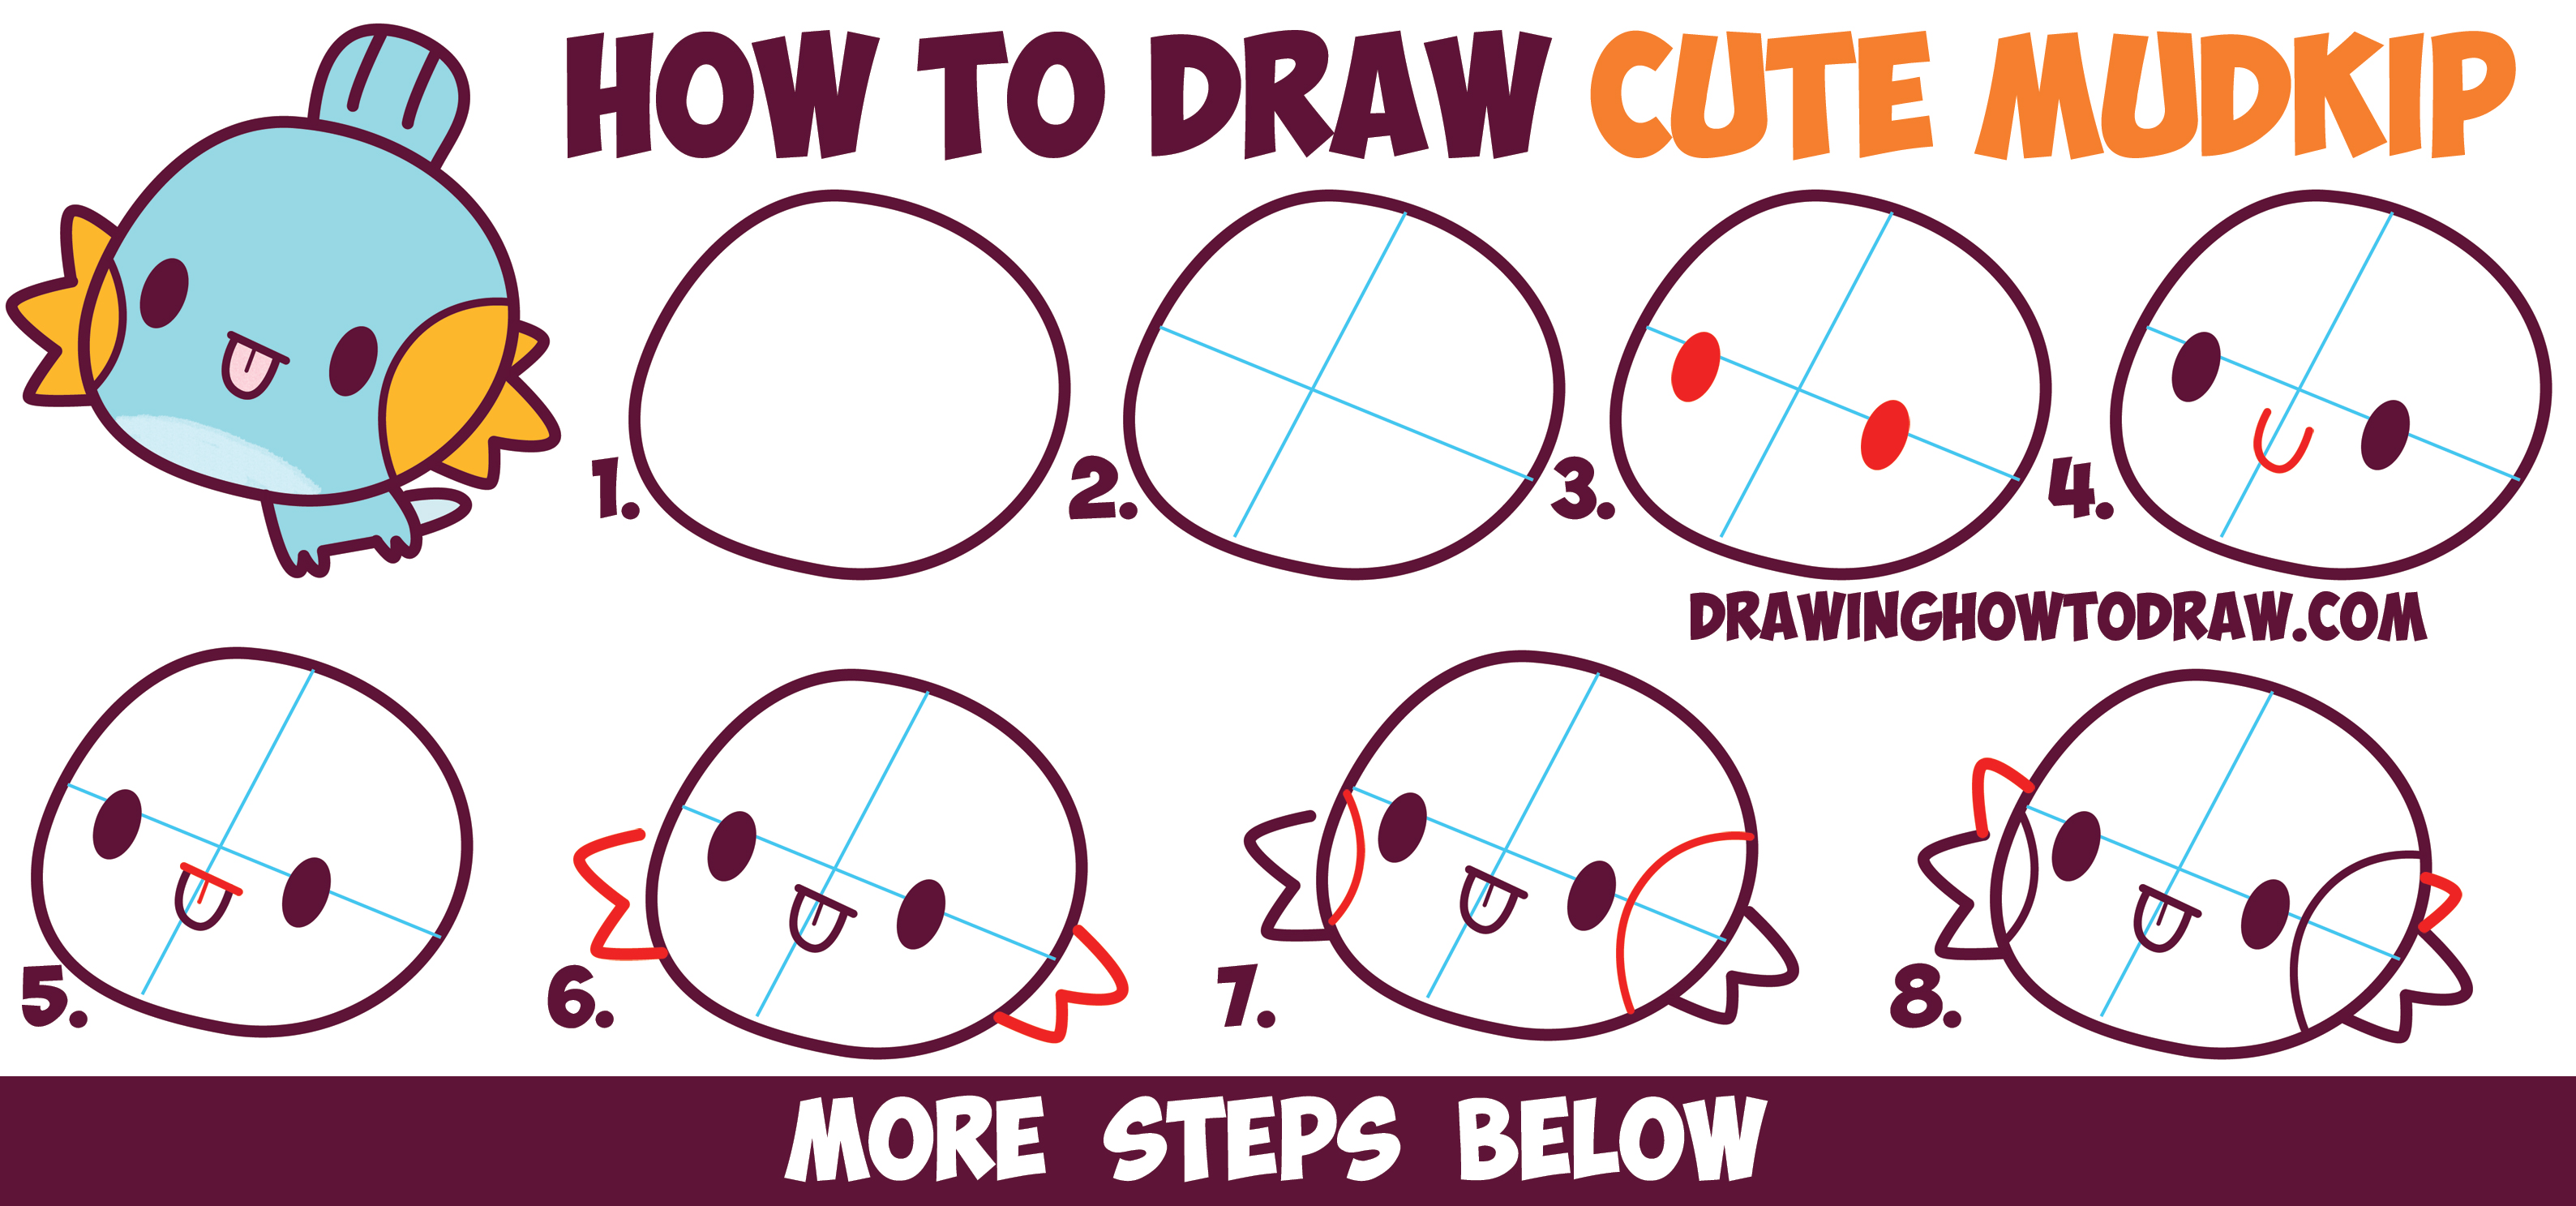 How to Draw MudKip from Pokemon (Cute / Chibi / Kawaii) Easy Step by ...